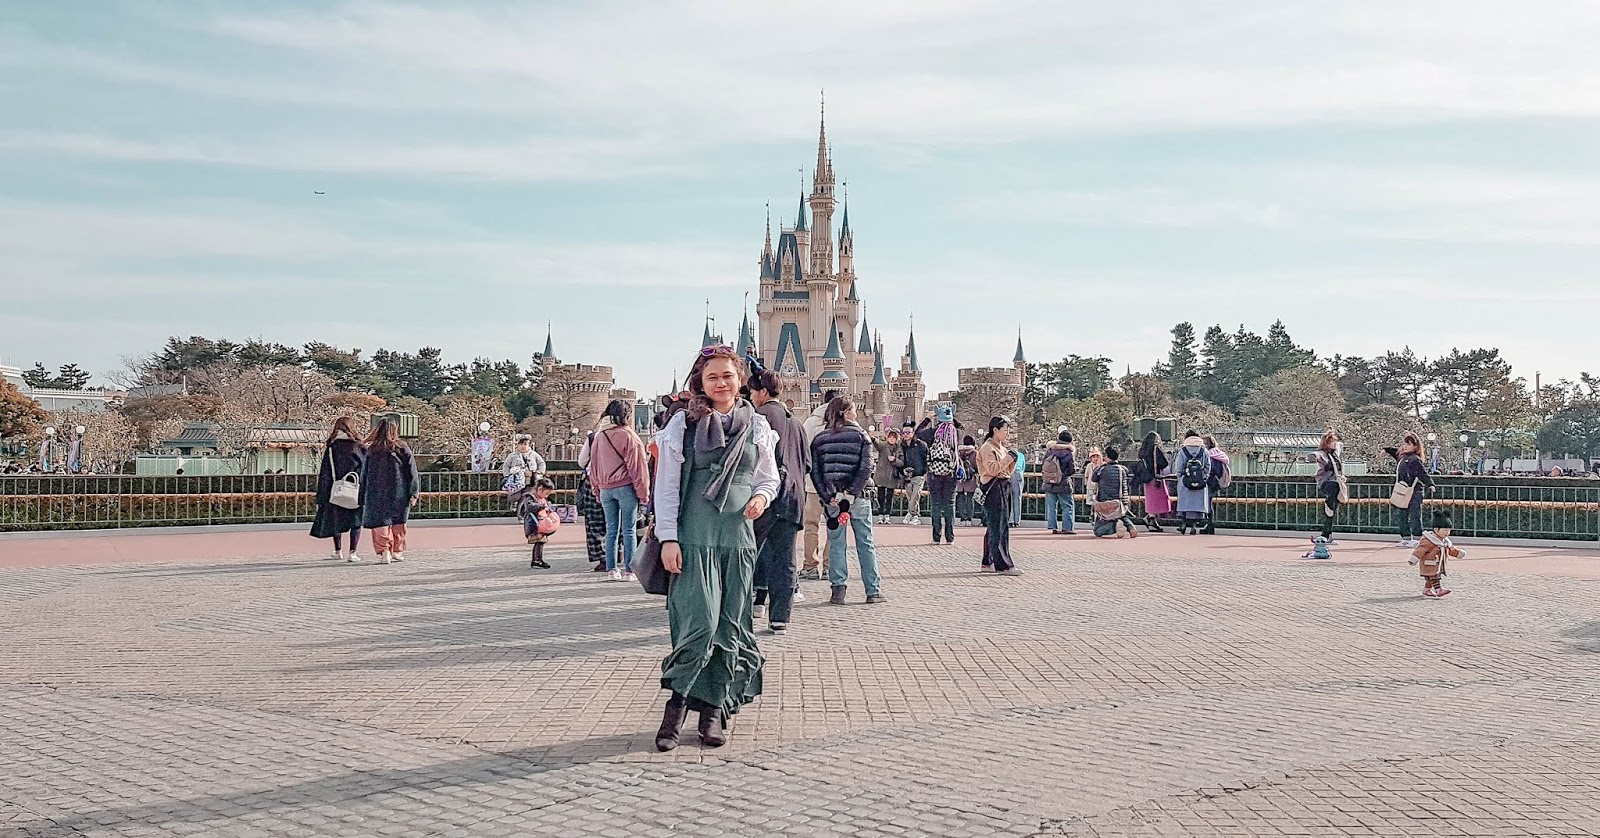 Tokyo Disneyland: The Happiest Place on Earth!